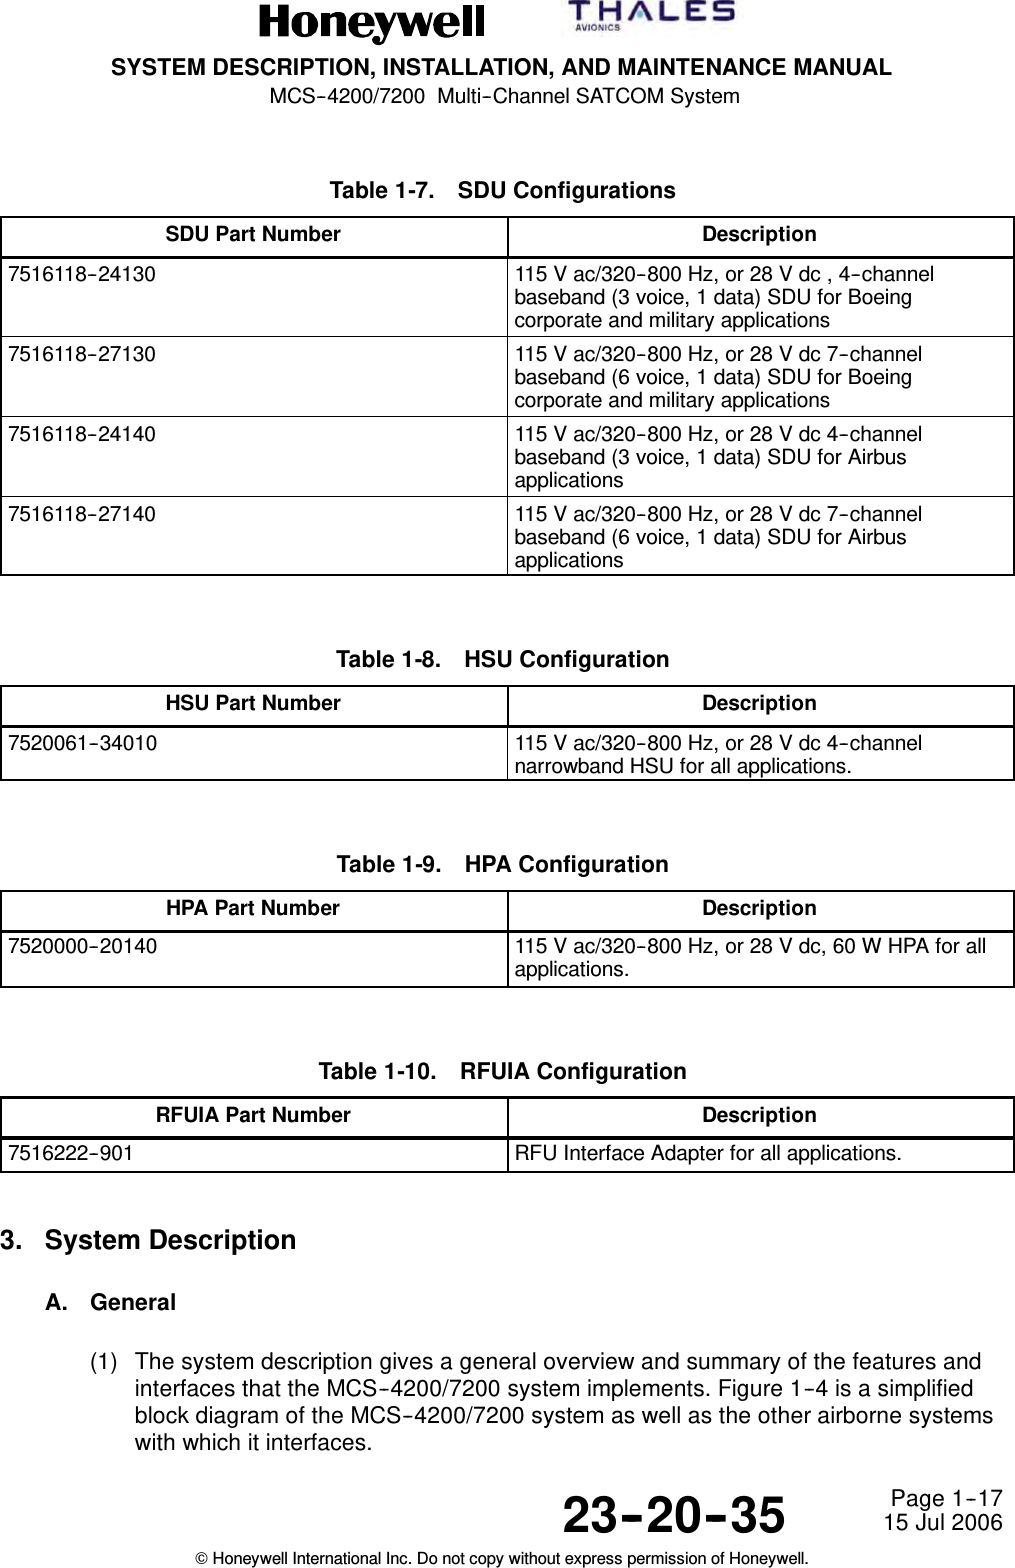 SYSTEM DESCRIPTION, INSTALLATION, AND MAINTENANCE MANUALMCS--4200/7200 Multi--Channel SATCOM System23--20--35 15 Jul 2006Honeywell International Inc. Do not copy without express permission of Honeywell.Page 1--17Table 1-7. SDU ConfigurationsSDU Part Number Description7516118--24130 115 V ac/320--800 Hz, or 28 V dc , 4--channelbaseband (3 voice, 1 data) SDU for Boeingcorporate and military applications7516118--27130 115 V ac/320--800 Hz, or 28 V dc 7--channelbaseband (6 voice, 1 data) SDU for Boeingcorporate and military applications7516118--24140 115 V ac/320--800 Hz, or 28 V dc 4--channelbaseband (3 voice, 1 data) SDU for Airbusapplications7516118--27140 115 V ac/320--800 Hz, or 28 V dc 7--channelbaseband (6 voice, 1 data) SDU for AirbusapplicationsTable 1-8. HSU ConfigurationHSU Part Number Description7520061--34010 115 V ac/320--800 Hz, or 28 V dc 4--channelnarrowband HSU for all applications.Table 1-9. HPA ConfigurationHPA Part Number Description7520000--20140 115 V ac/320--800 Hz, or 28 V dc, 60 W HPA for allapplications.Table 1-10. RFUIA ConfigurationRFUIA Part Number Description7516222--901 RFU Interface Adapter for all applications.3. System DescriptionA. General(1) The system description gives a general overview and summary of the features andinterfaces that the MCS--4200/7200 system implements. Figure 1--4 is a simplifiedblock diagram of the MCS--4200/7200 system as well as the other airborne systemswith which it interfaces.